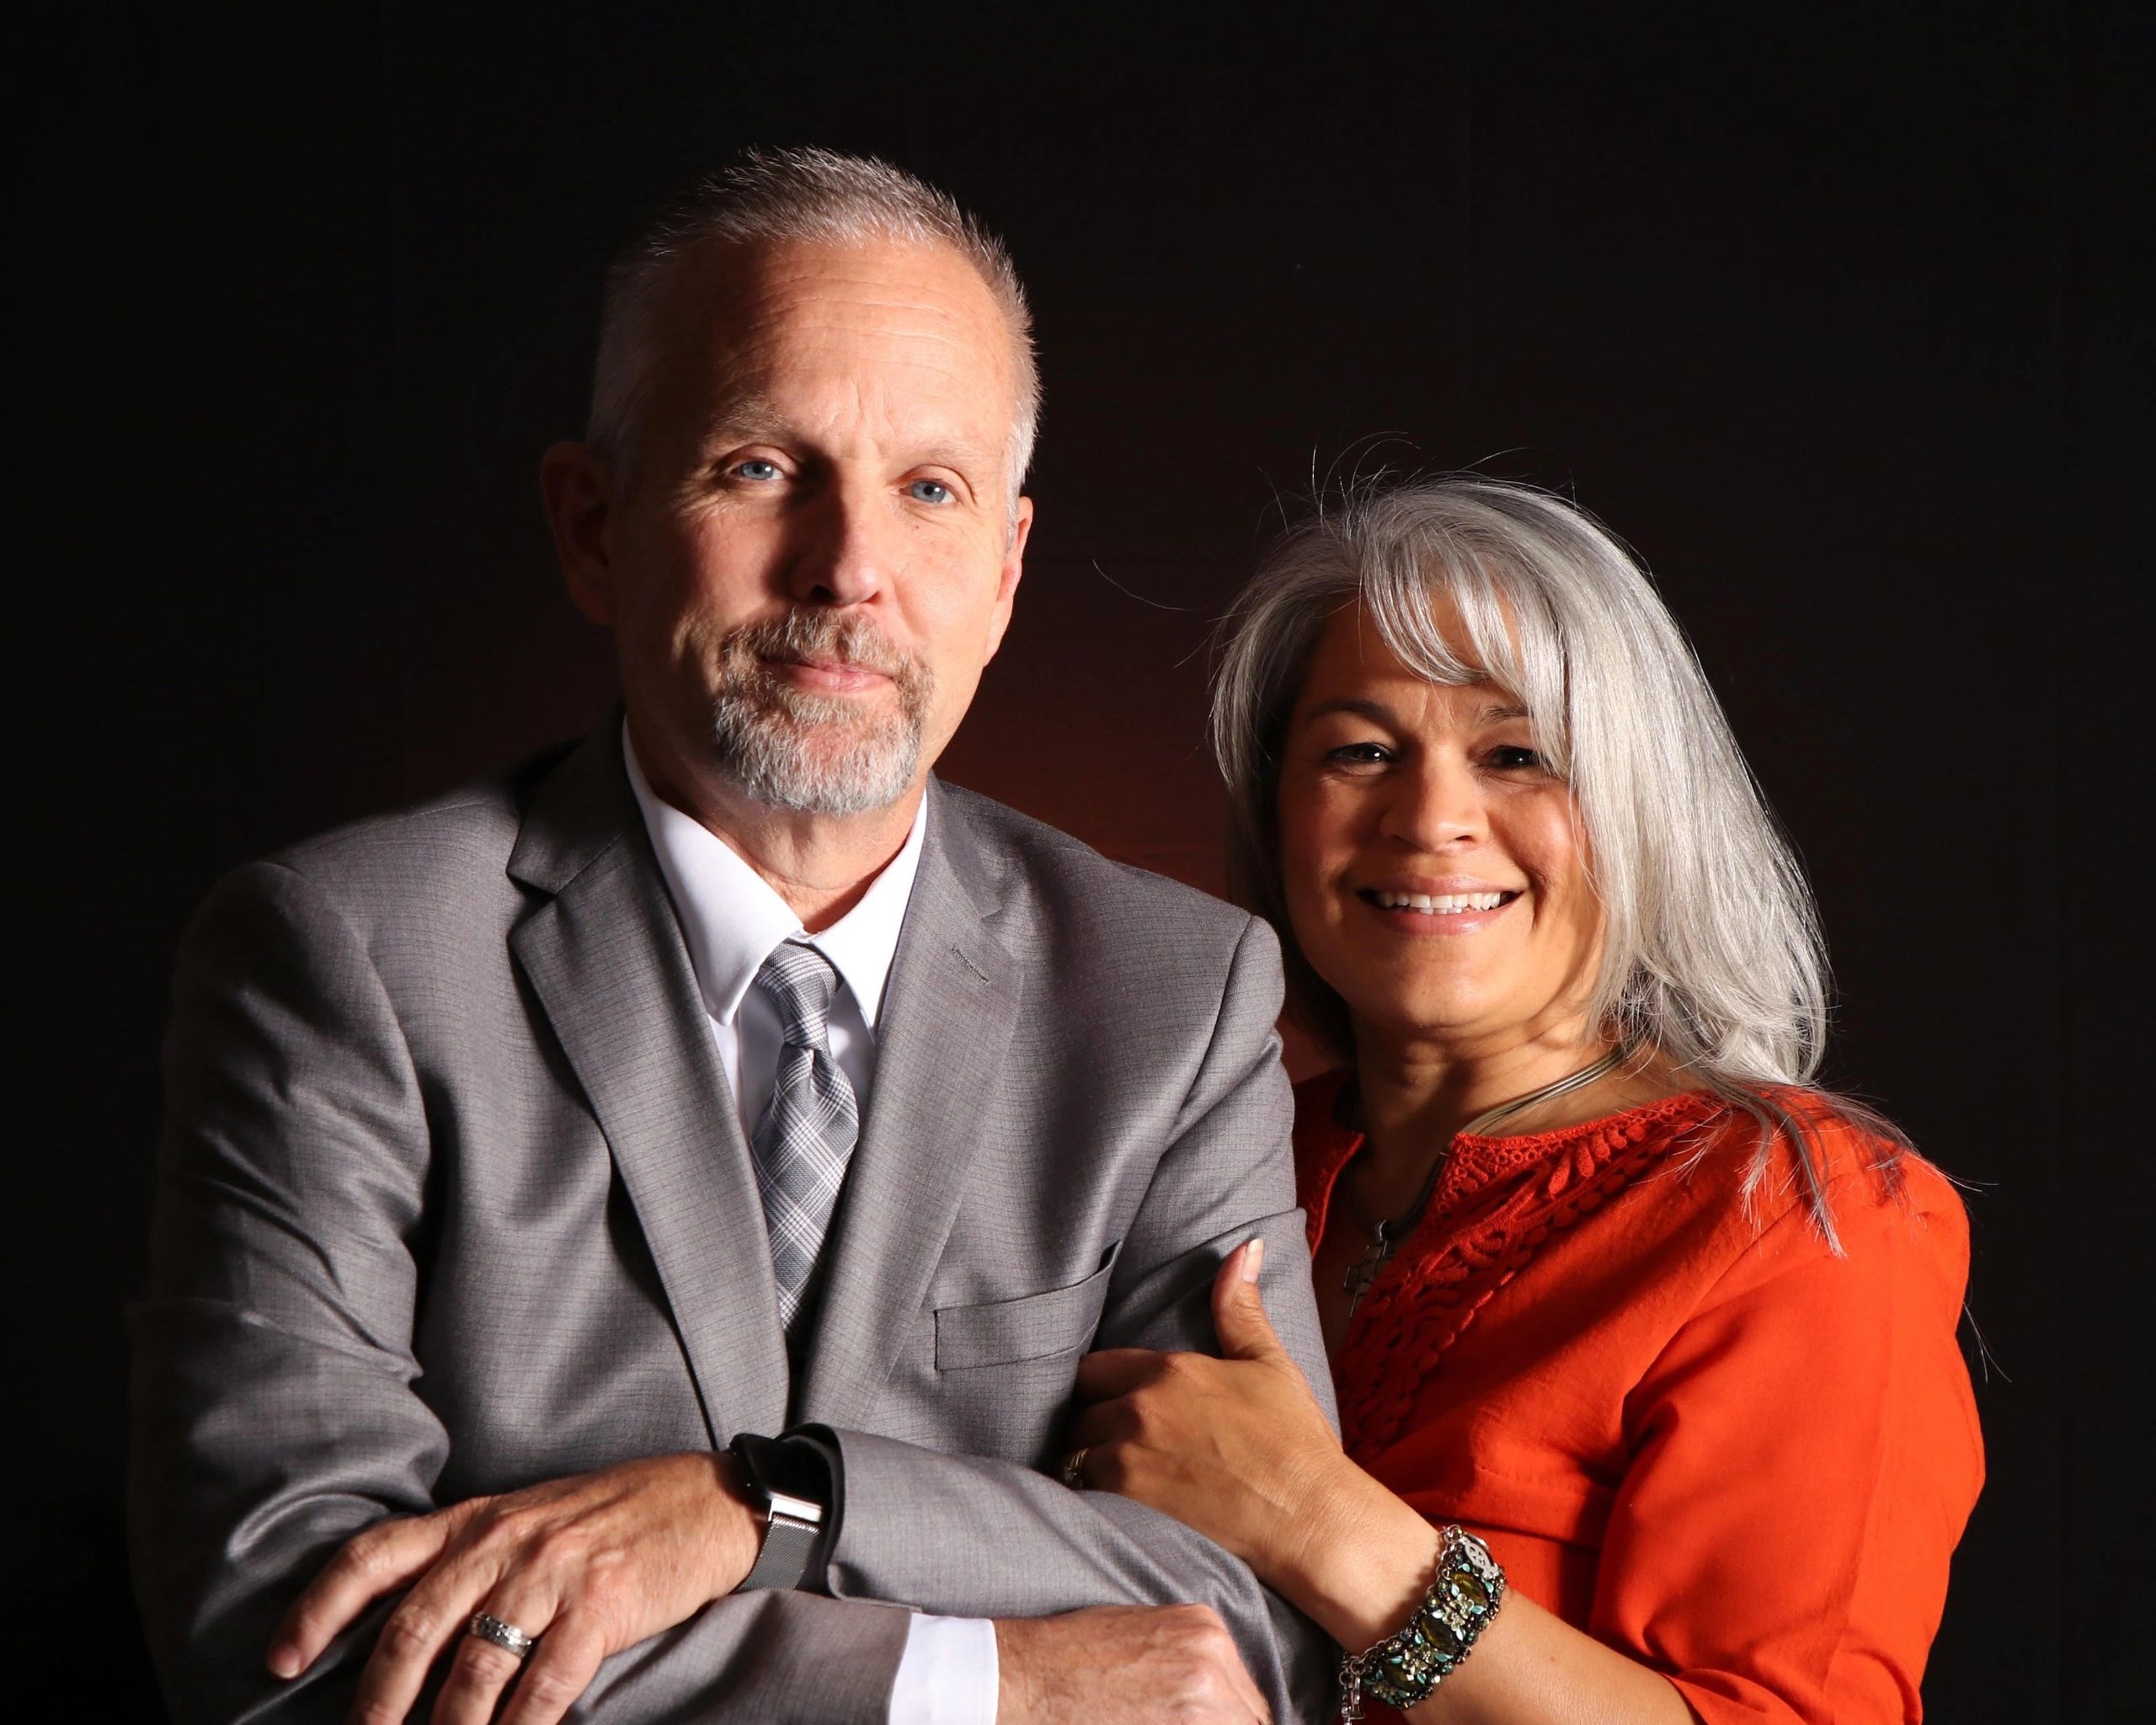 Pastor Mike and Michelle Meadows